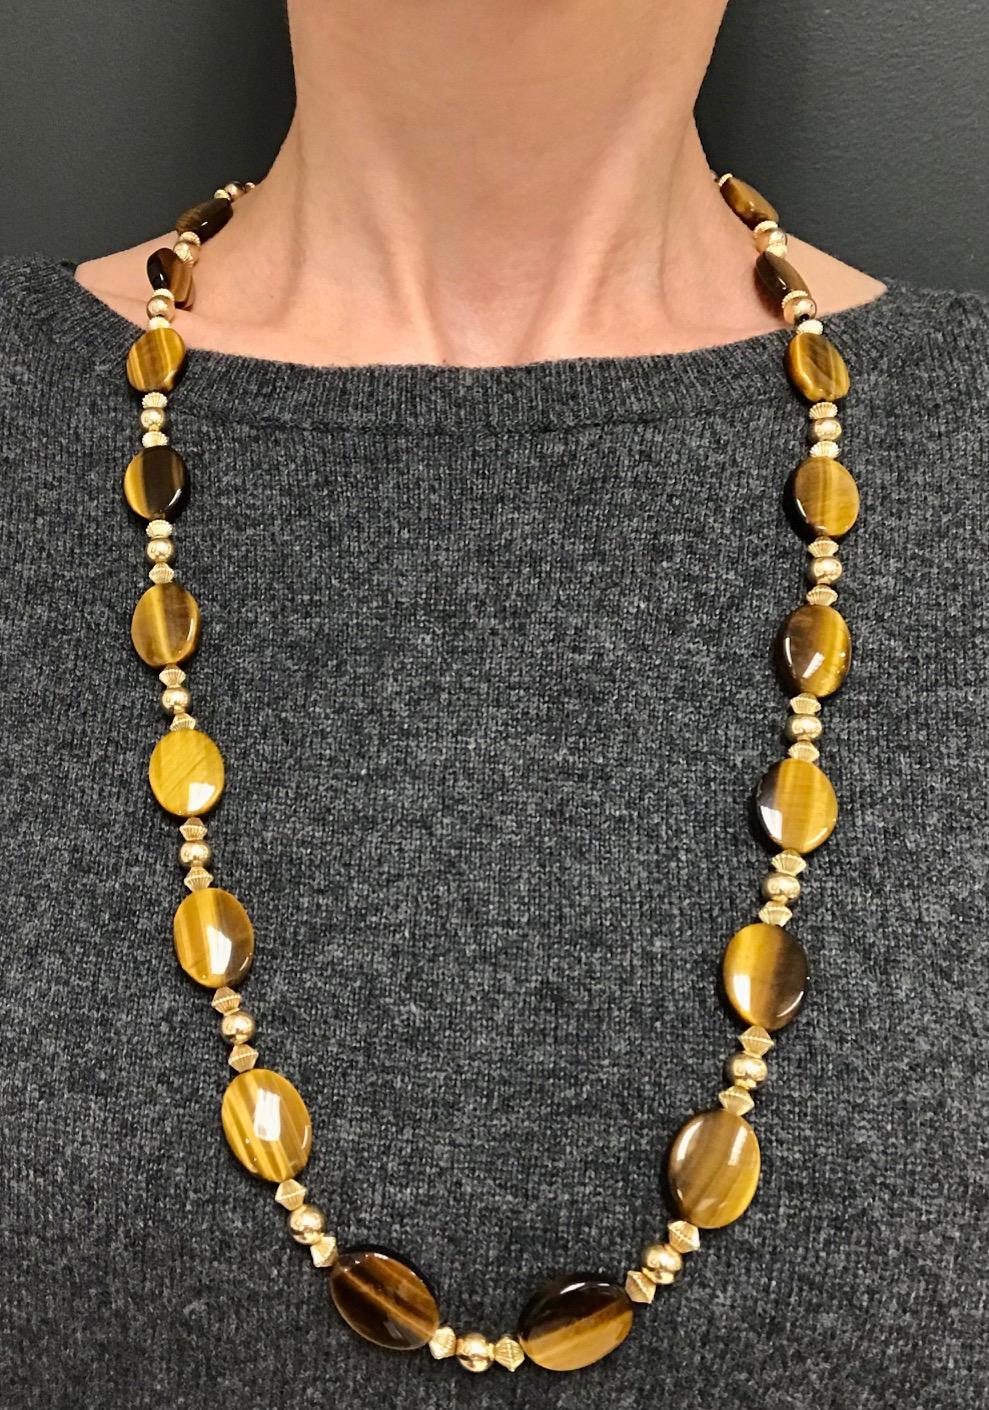 A gorgeous 14k gold and tiger's eye necklace by Tiffany & Co.
The gold rhombus and beads alternate with the oval tiger's eye disks. The gems are high-polished which creates an amazing glossy, silky look. This Tiffany & Co. necklace is beautifully